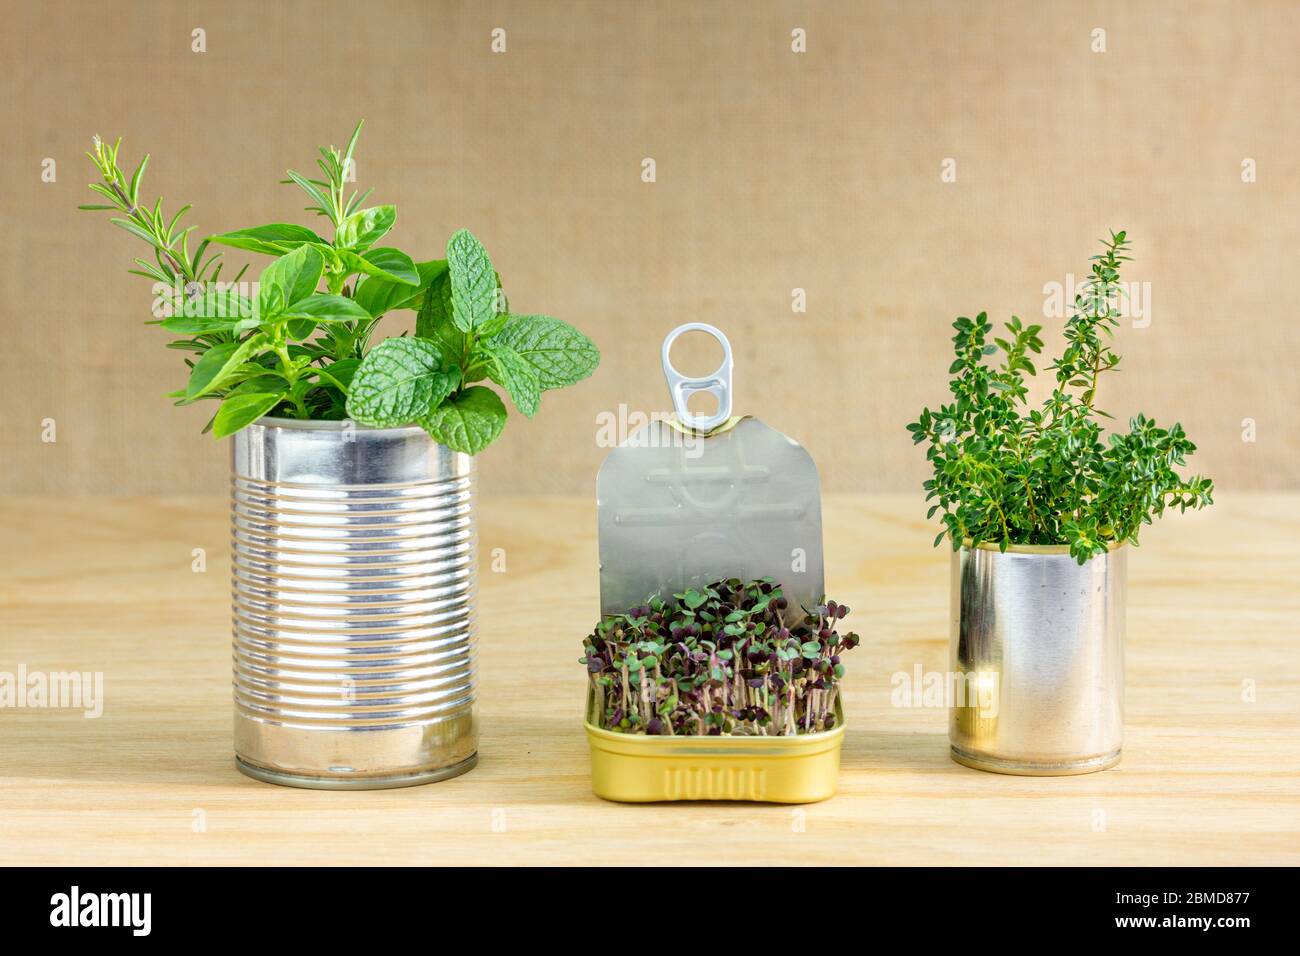 Reused tin cans containing herbs and growing salad greens, save money grow your own food at home,  zero waste, recycle, sustainable living concept. Stock Photo